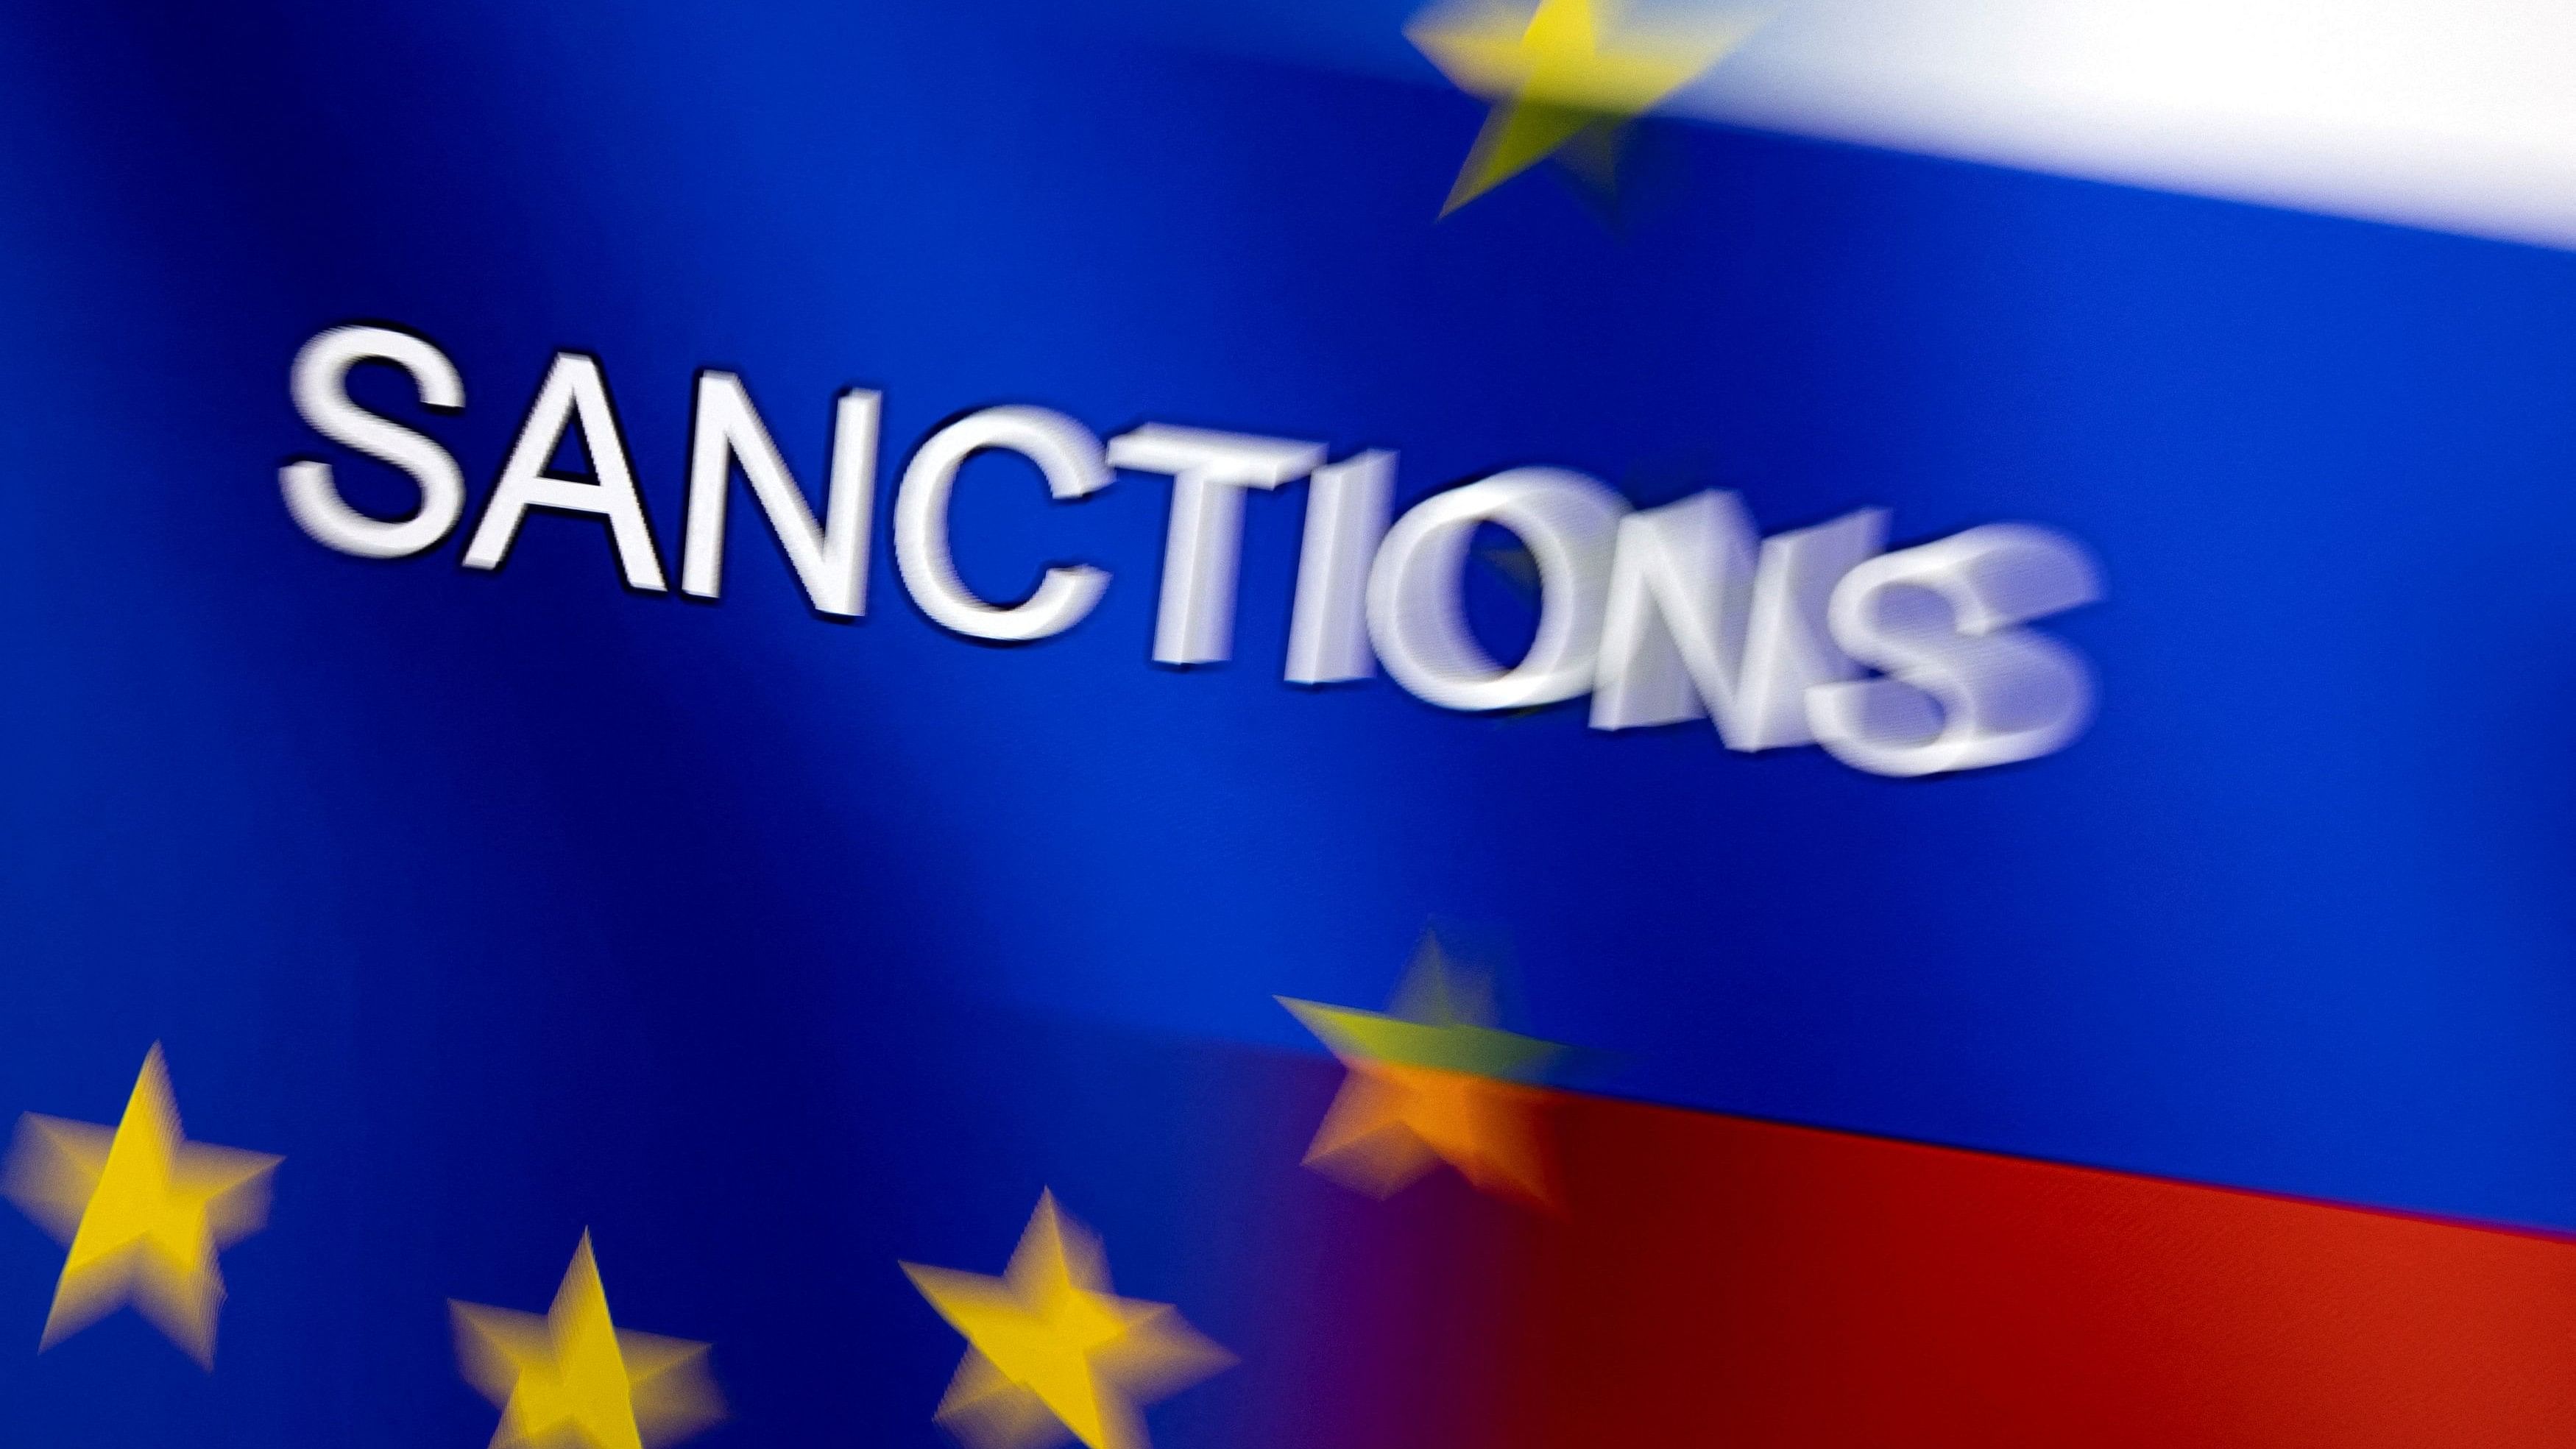 <div class="paragraphs"><p>"Sanctions" displayed on EU and Russian flags. Representative&nbsp;illustration. </p></div>